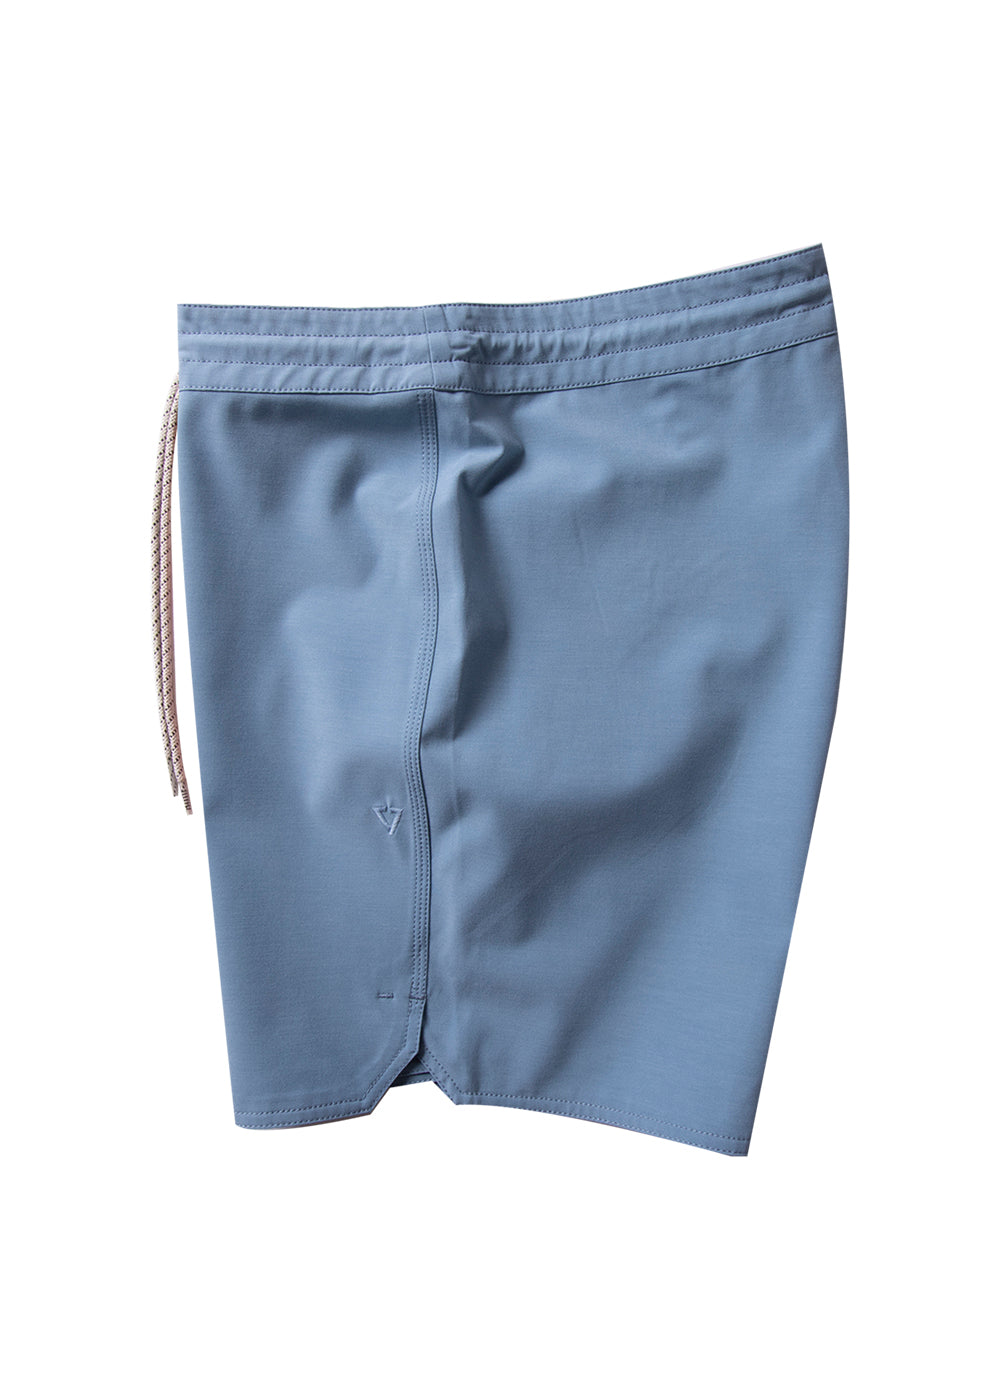 Vissla Men's cool blue Short Sets 16.5" Board short with white rope. Velcro pocket with patch. Side view